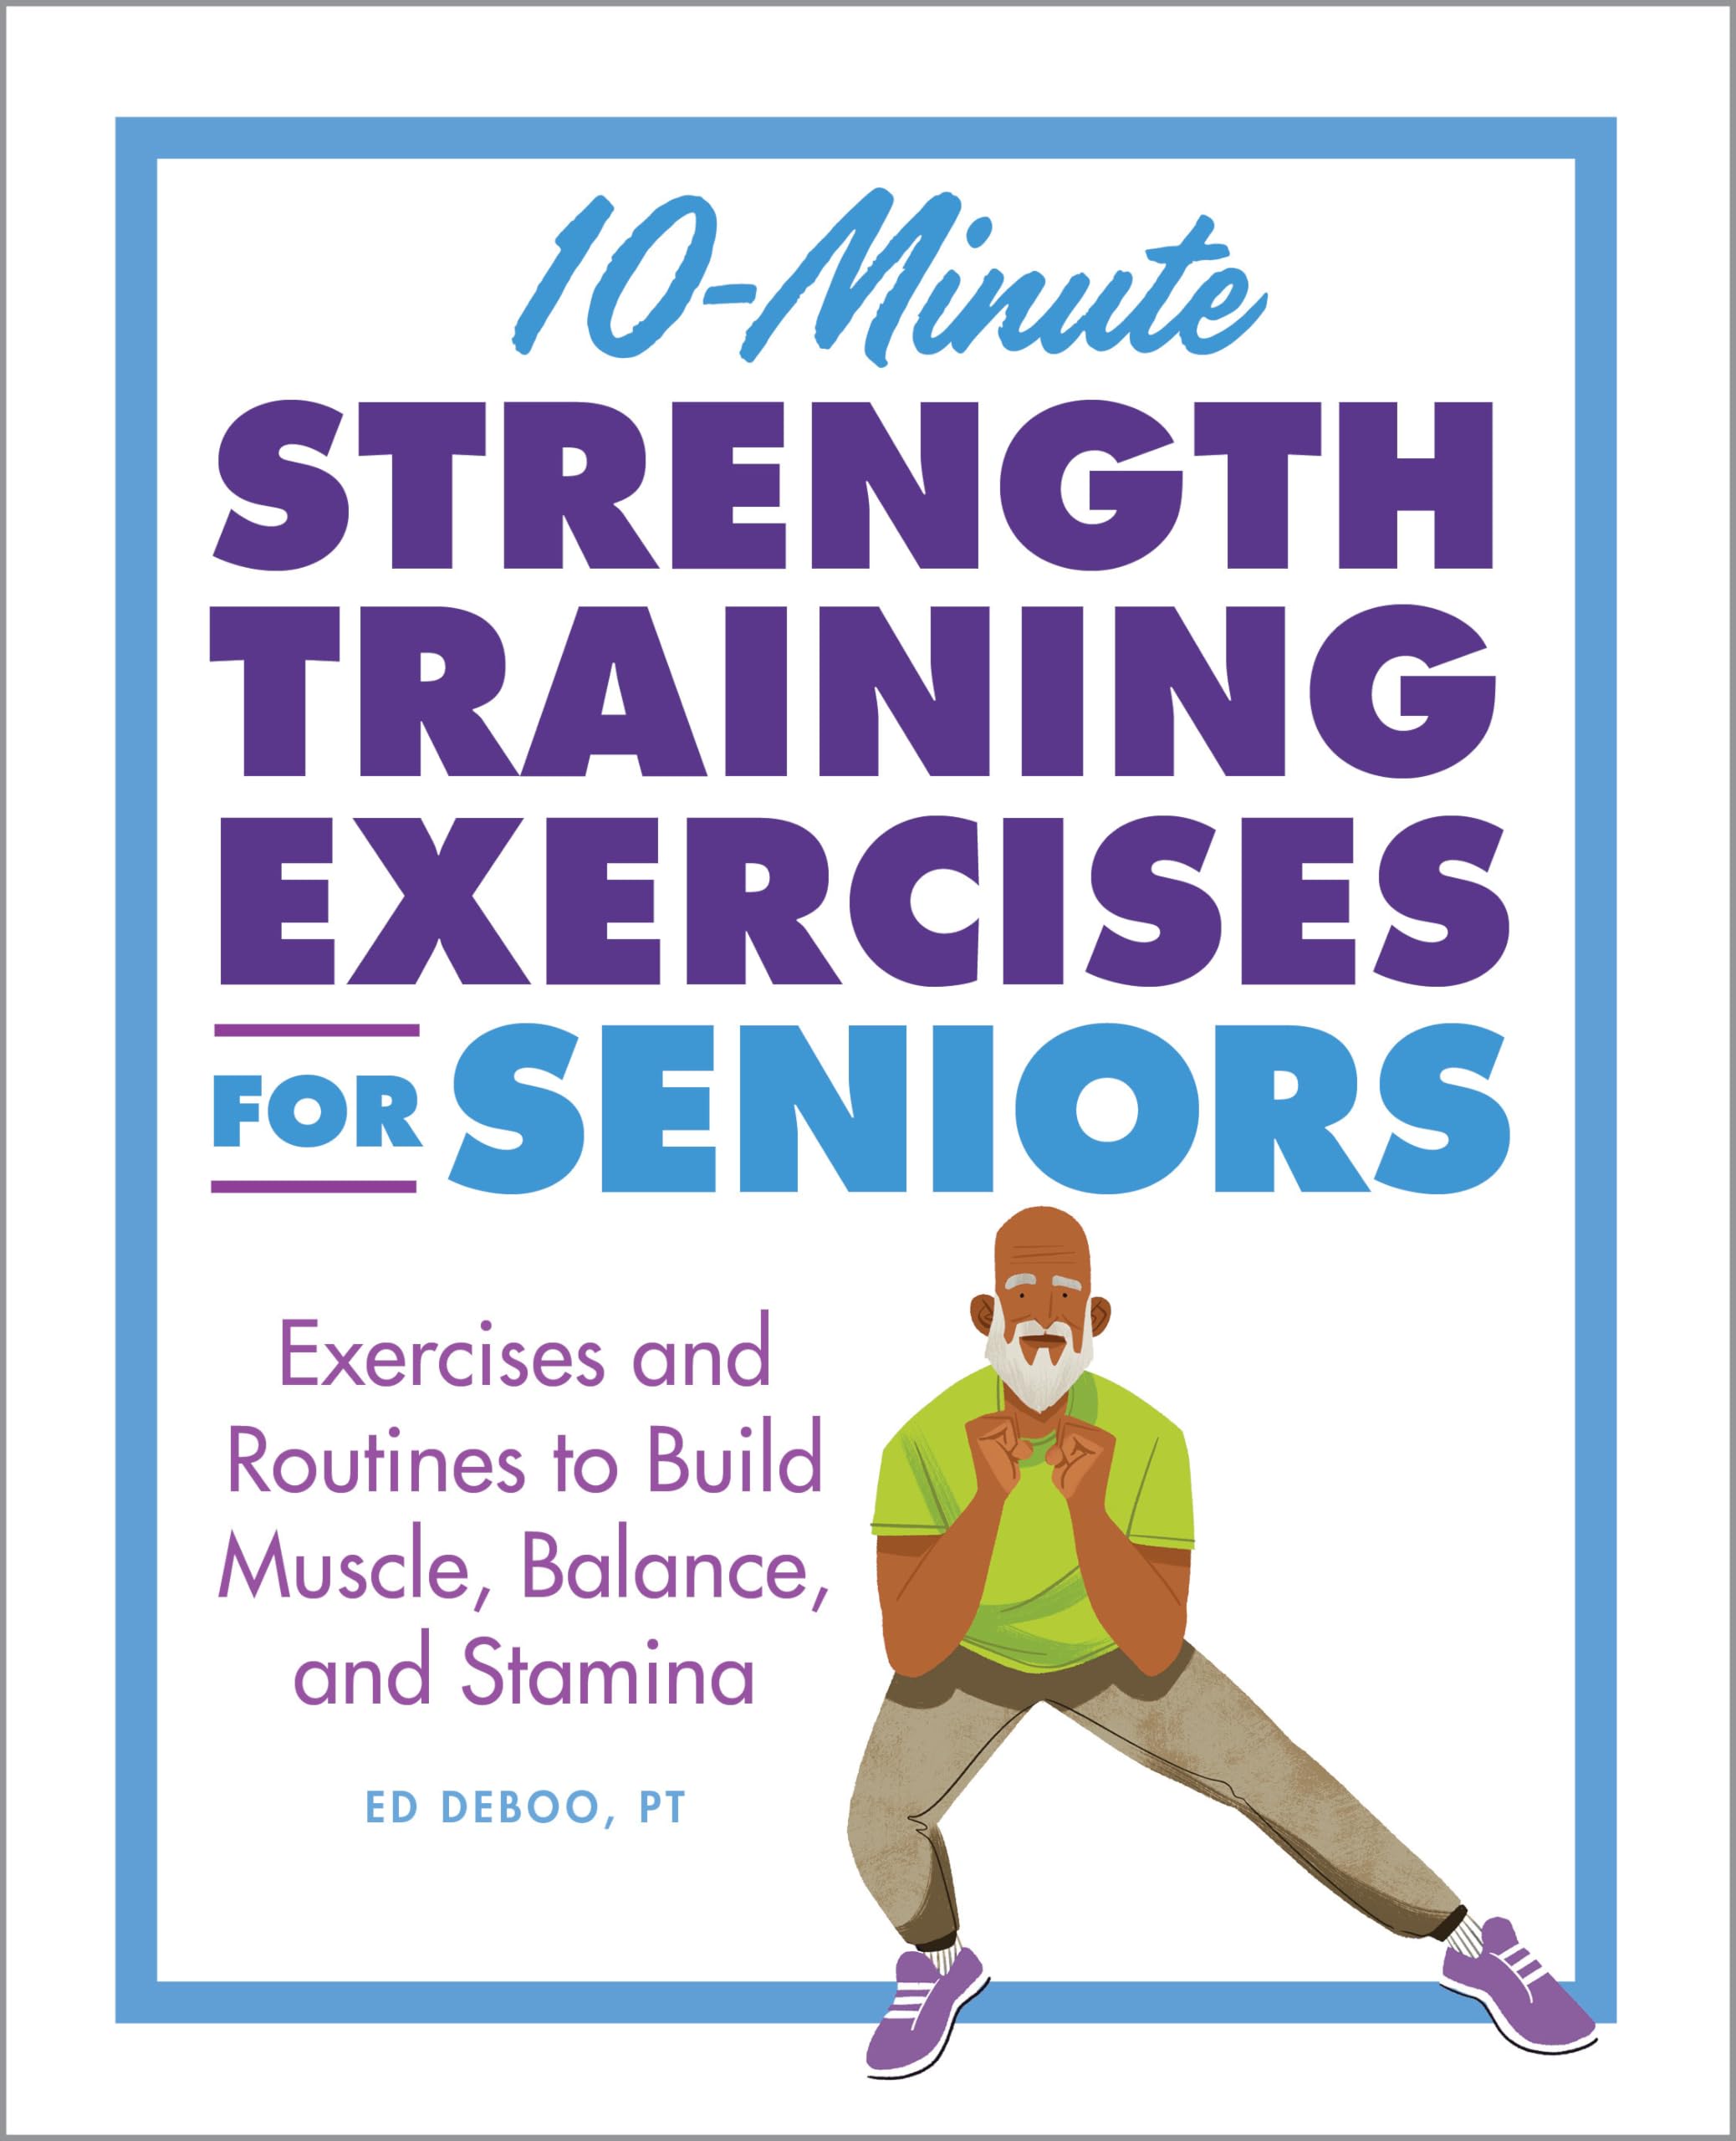 10-Minute Strength Training Exercises for Seniors: Exercises and Routines to Build Muscle, Balance, and Stamina by Deboo, Ed